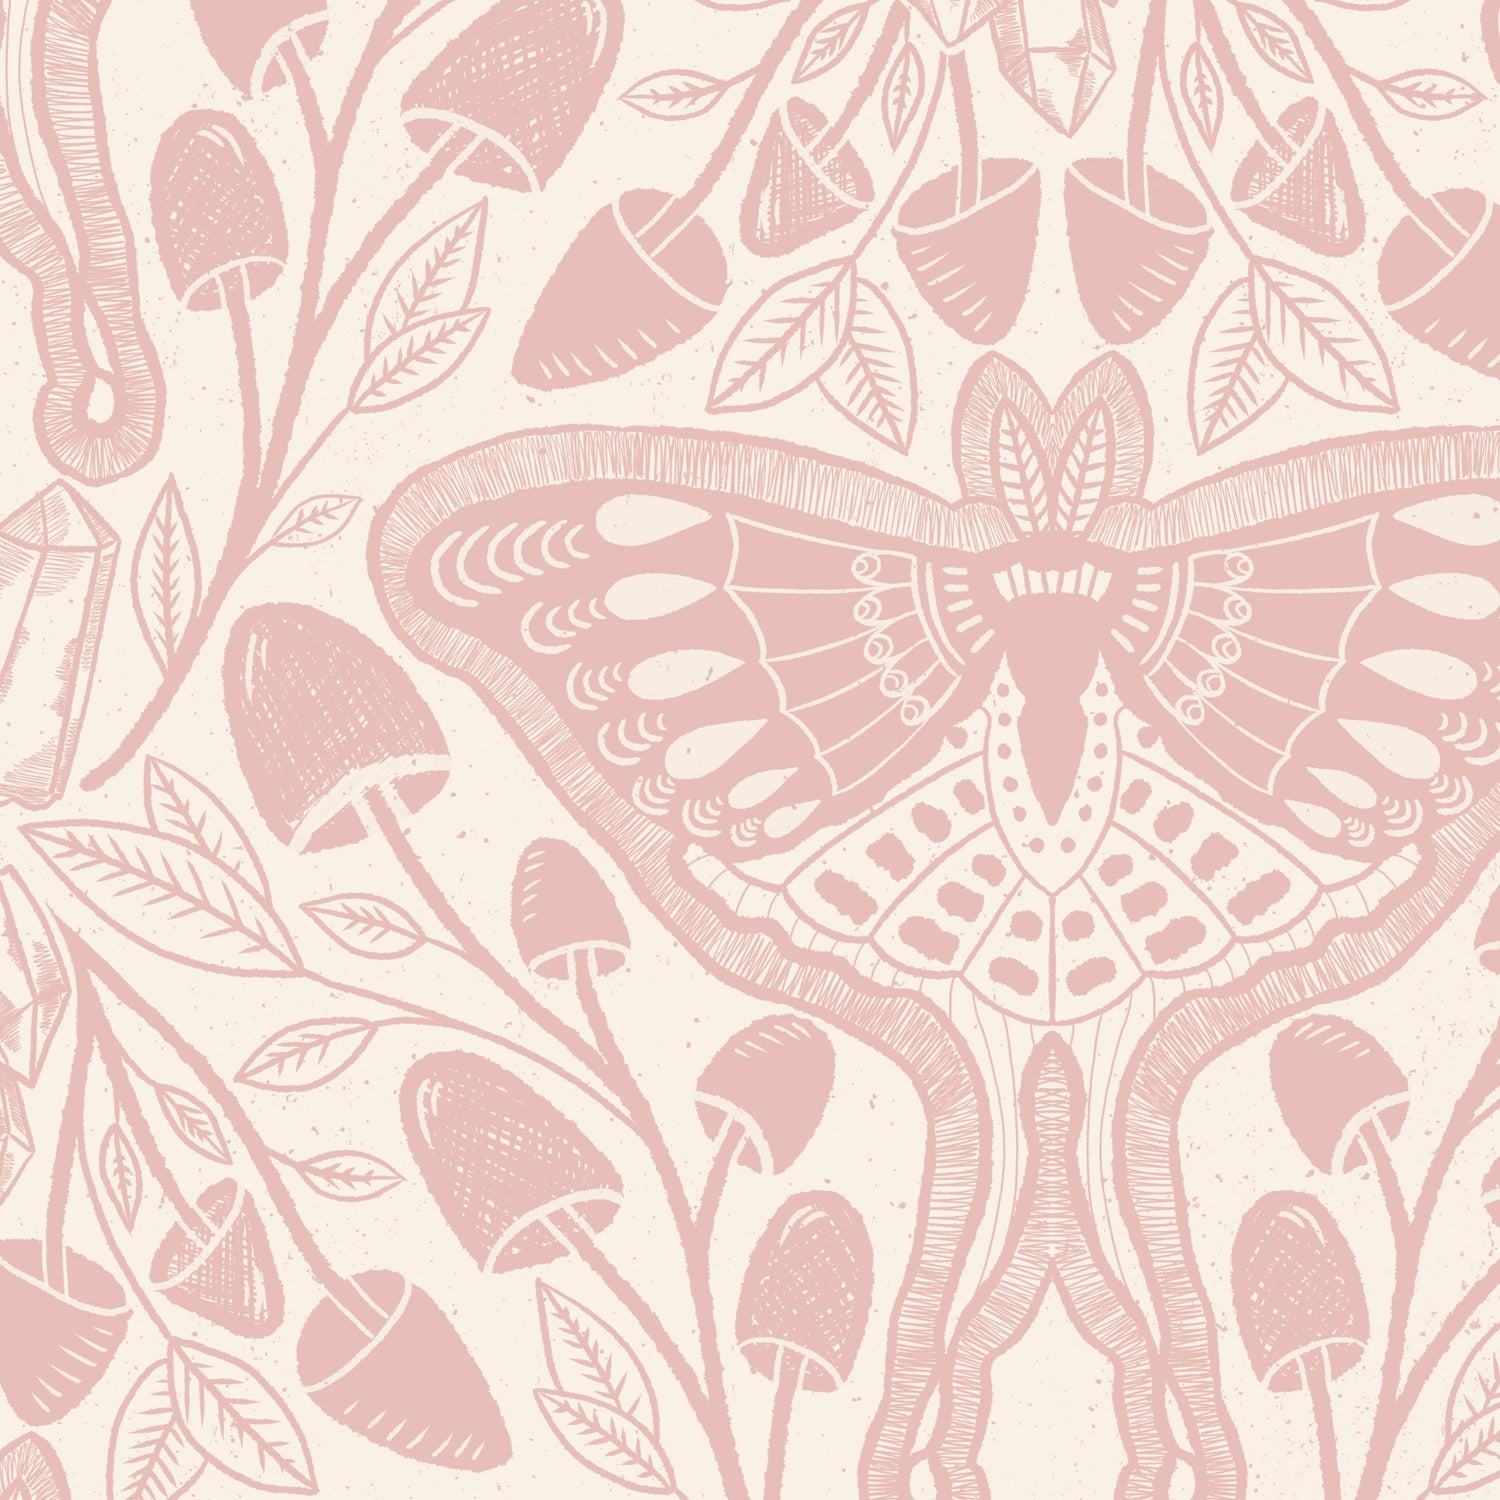 Luna Moths Wallpaper in Pink shown in a close up view.